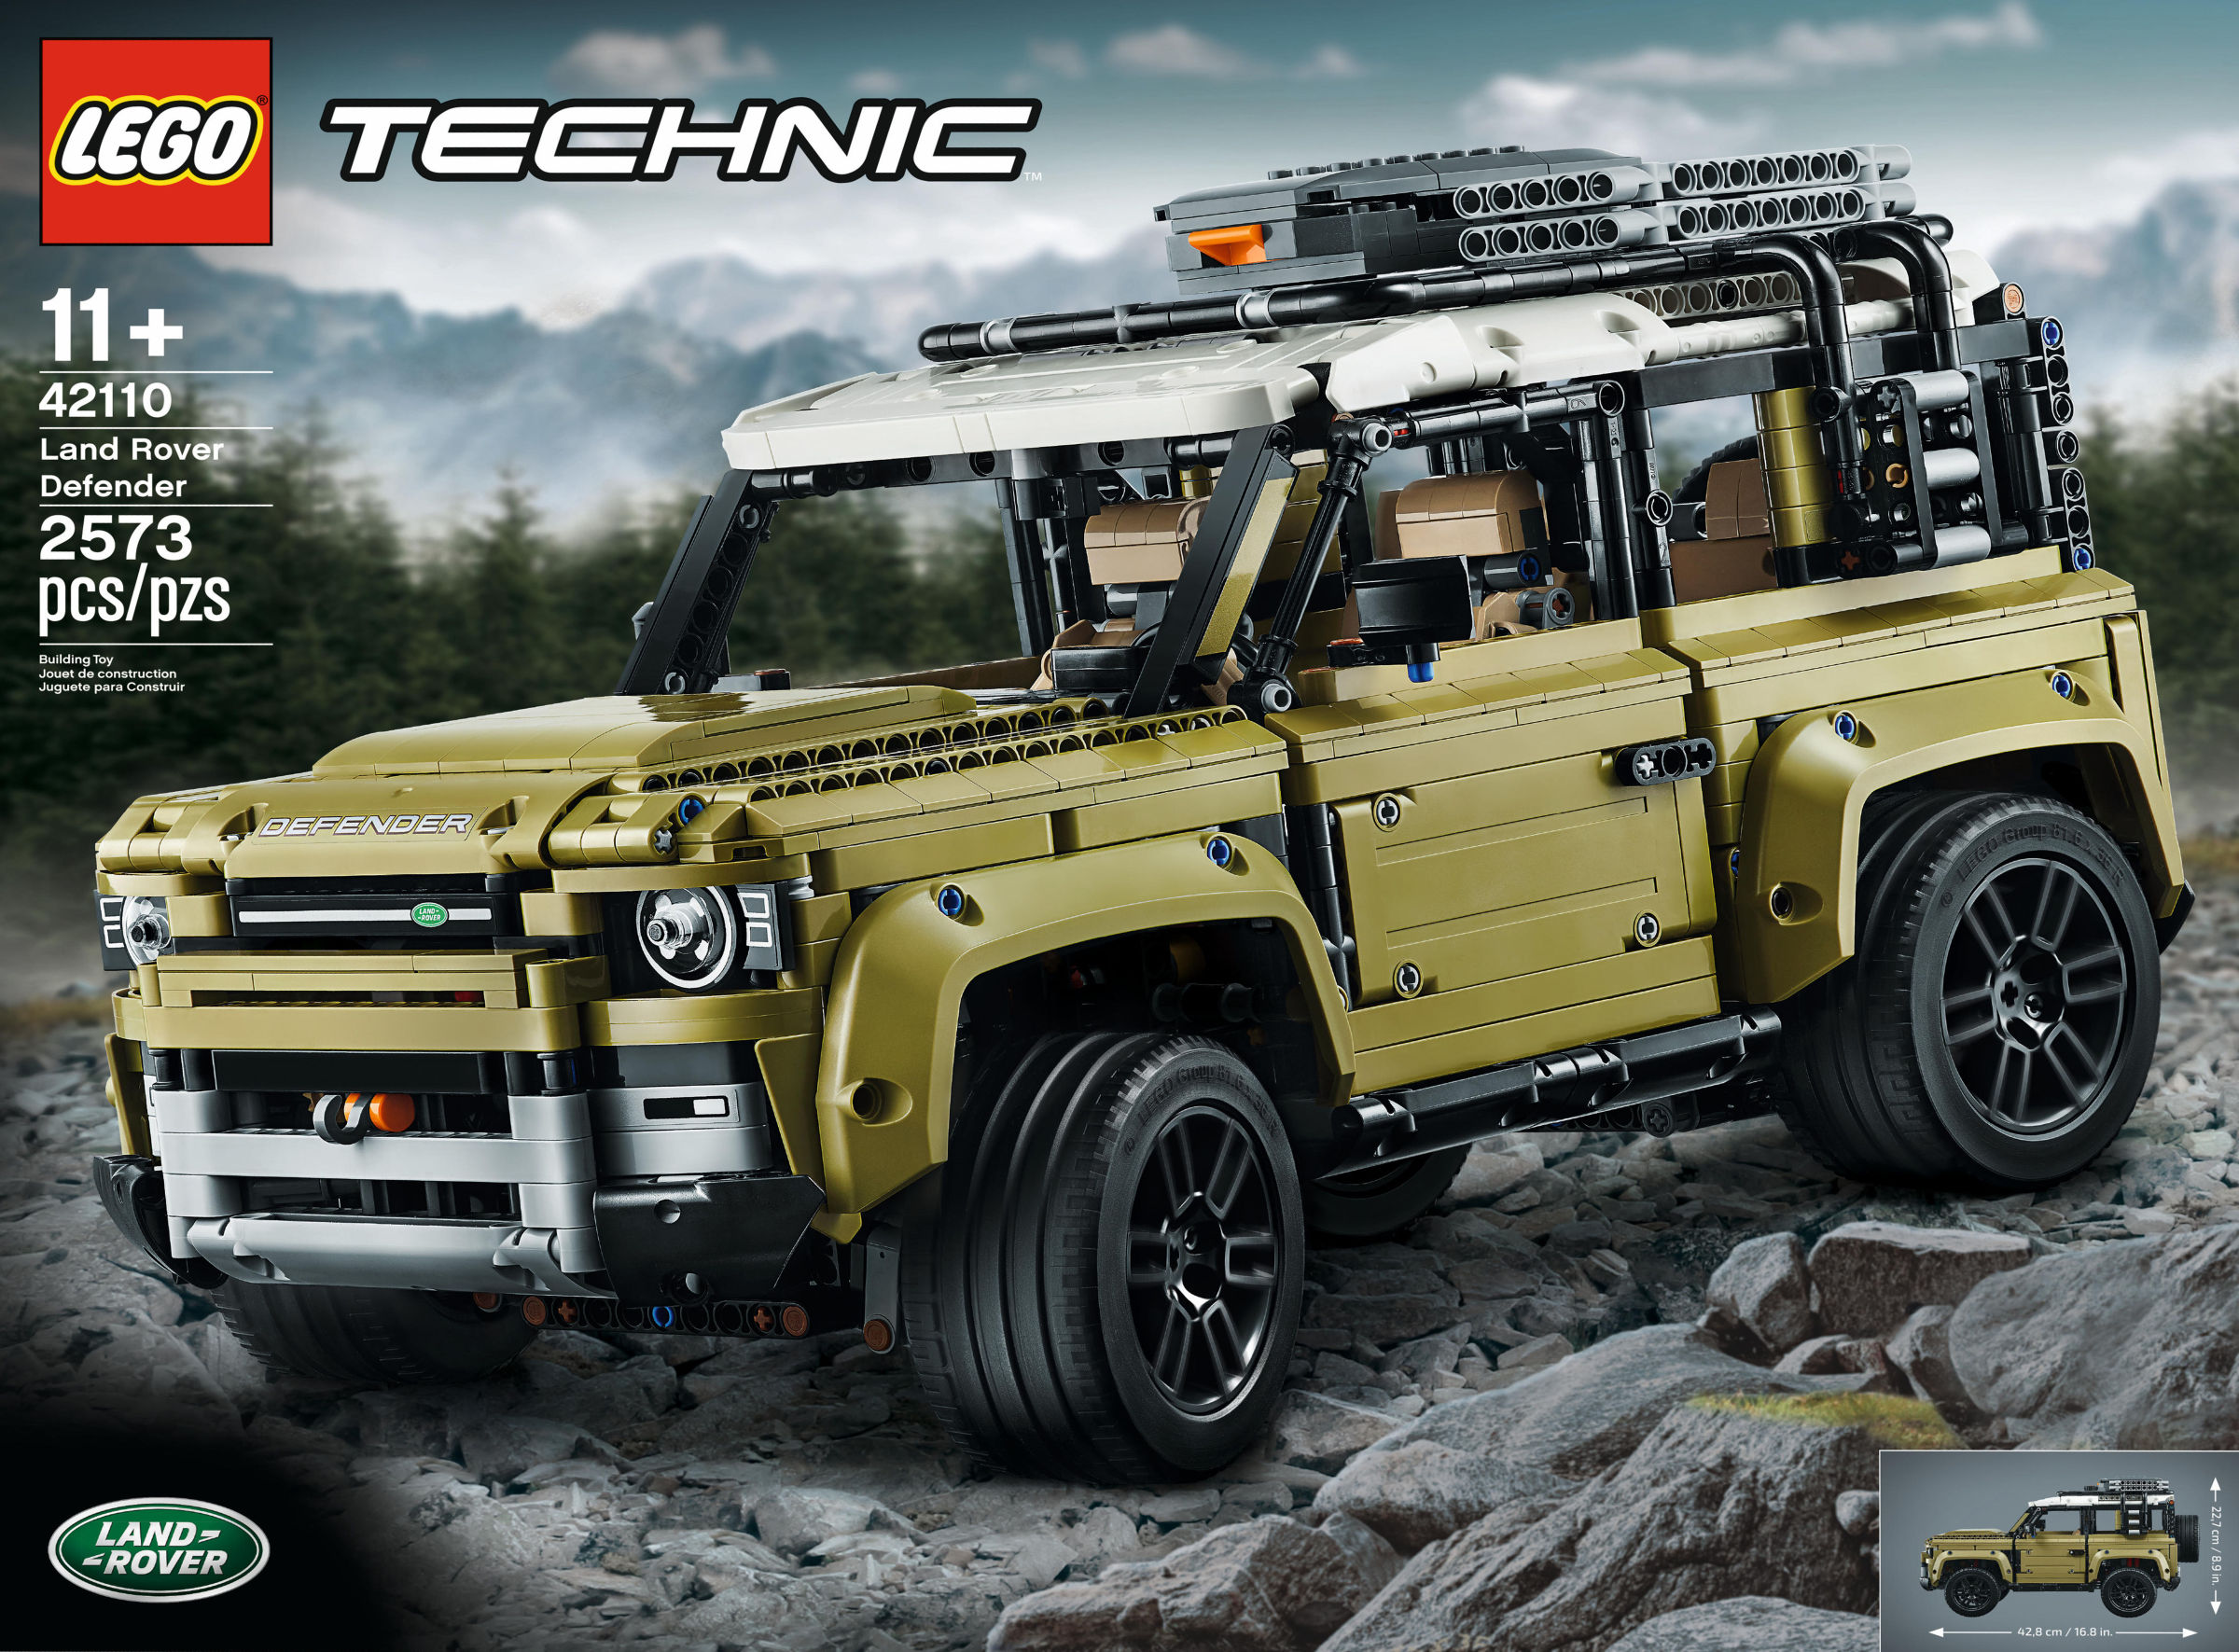 The box art for the upcoming LEGO Technic Land Rover Defender, set 42110.